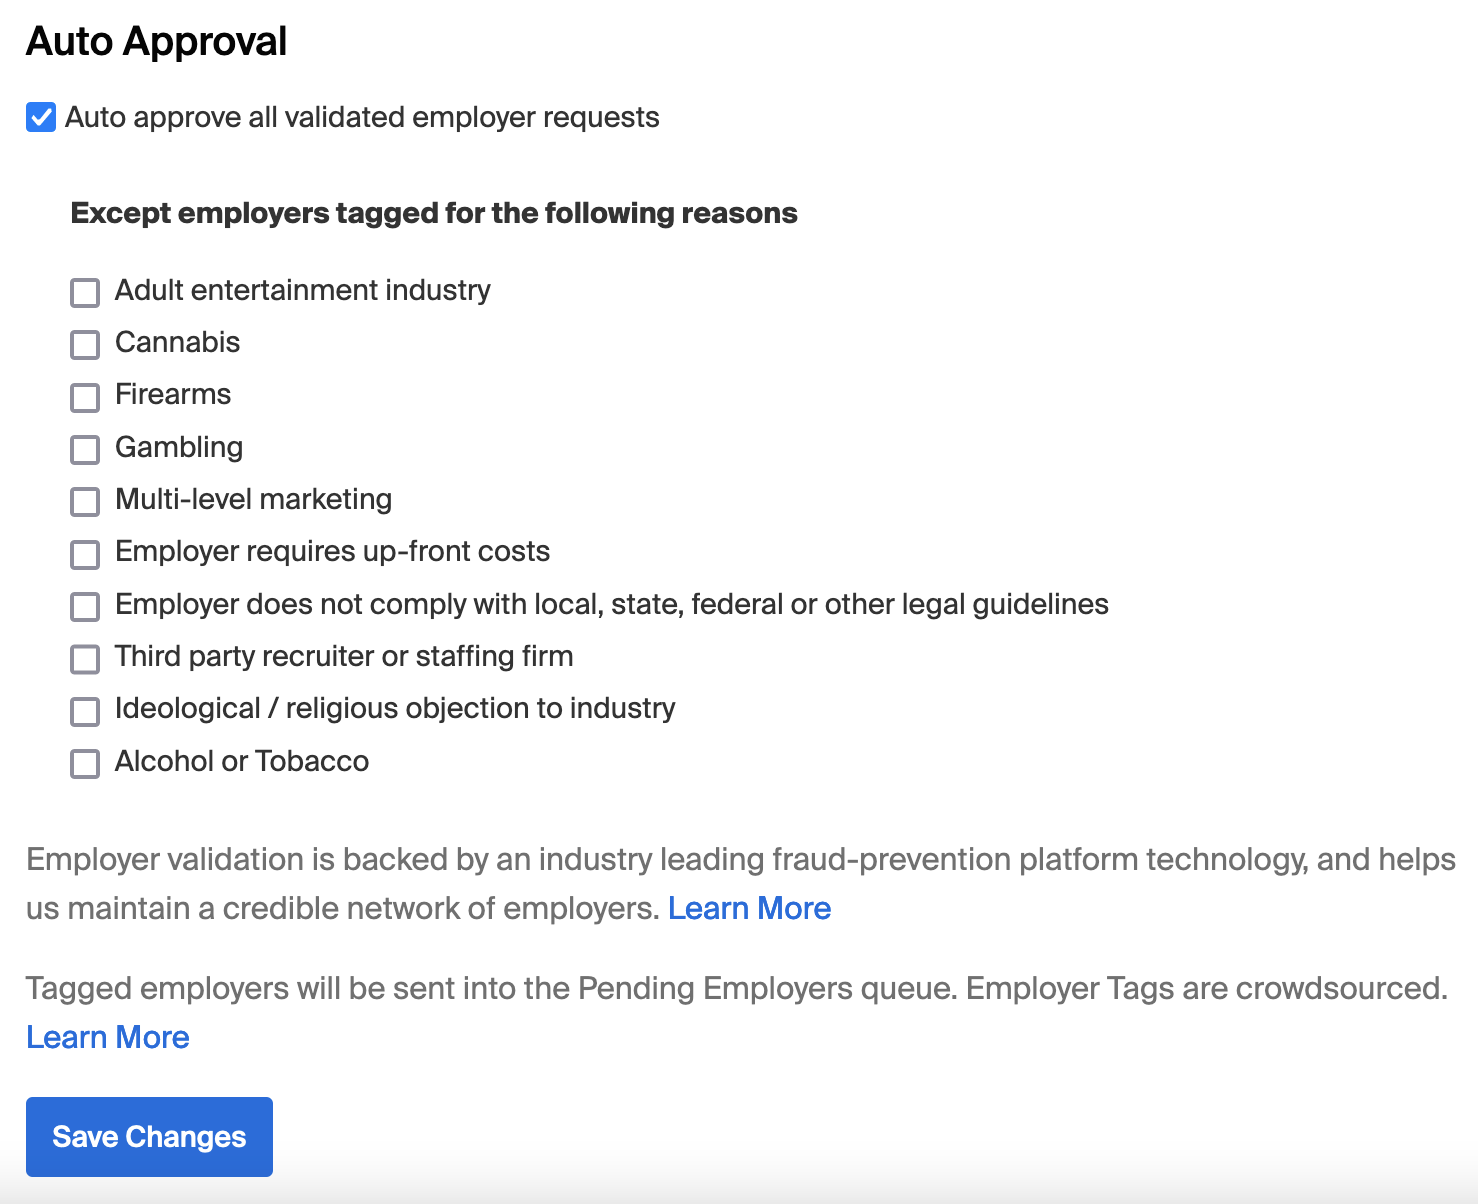 Auto_Approval_options_for_Employer_Approval_Preferences.png